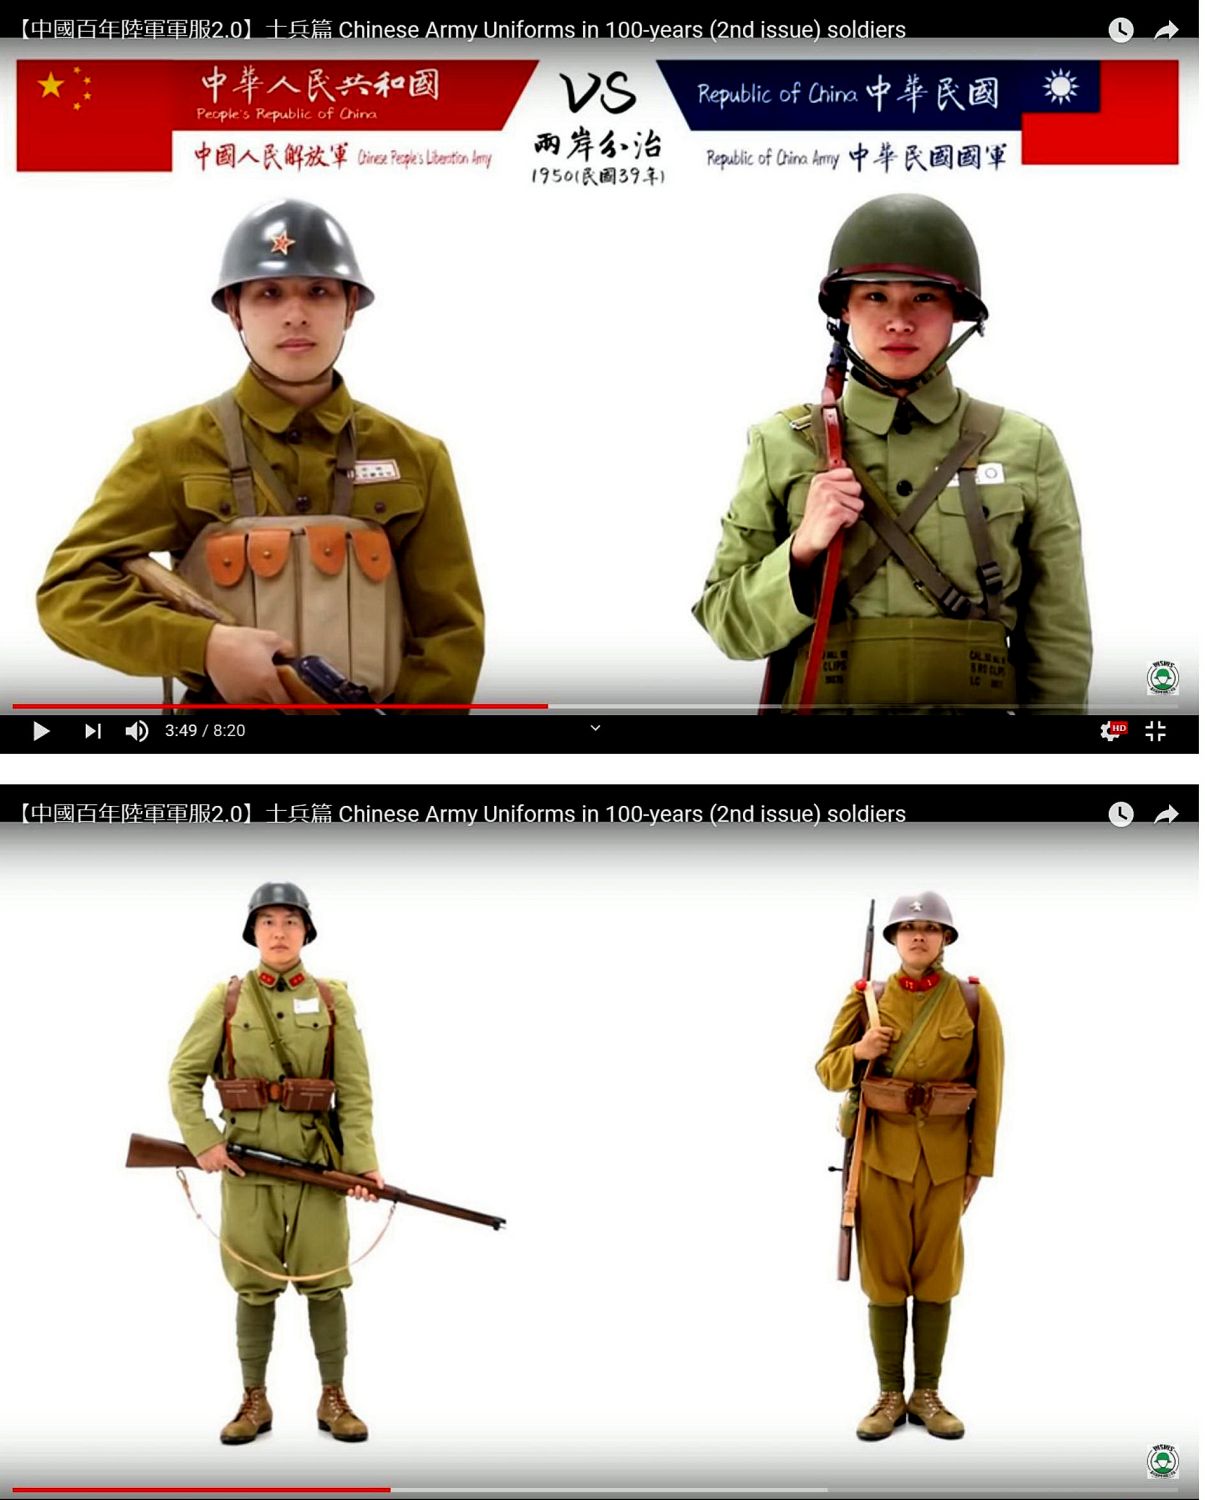 Chinese Army Forcporn Japanese Army - WW2 German, Soviet, Allied militaria, uniforms, awards, weapons history.  War relics forum